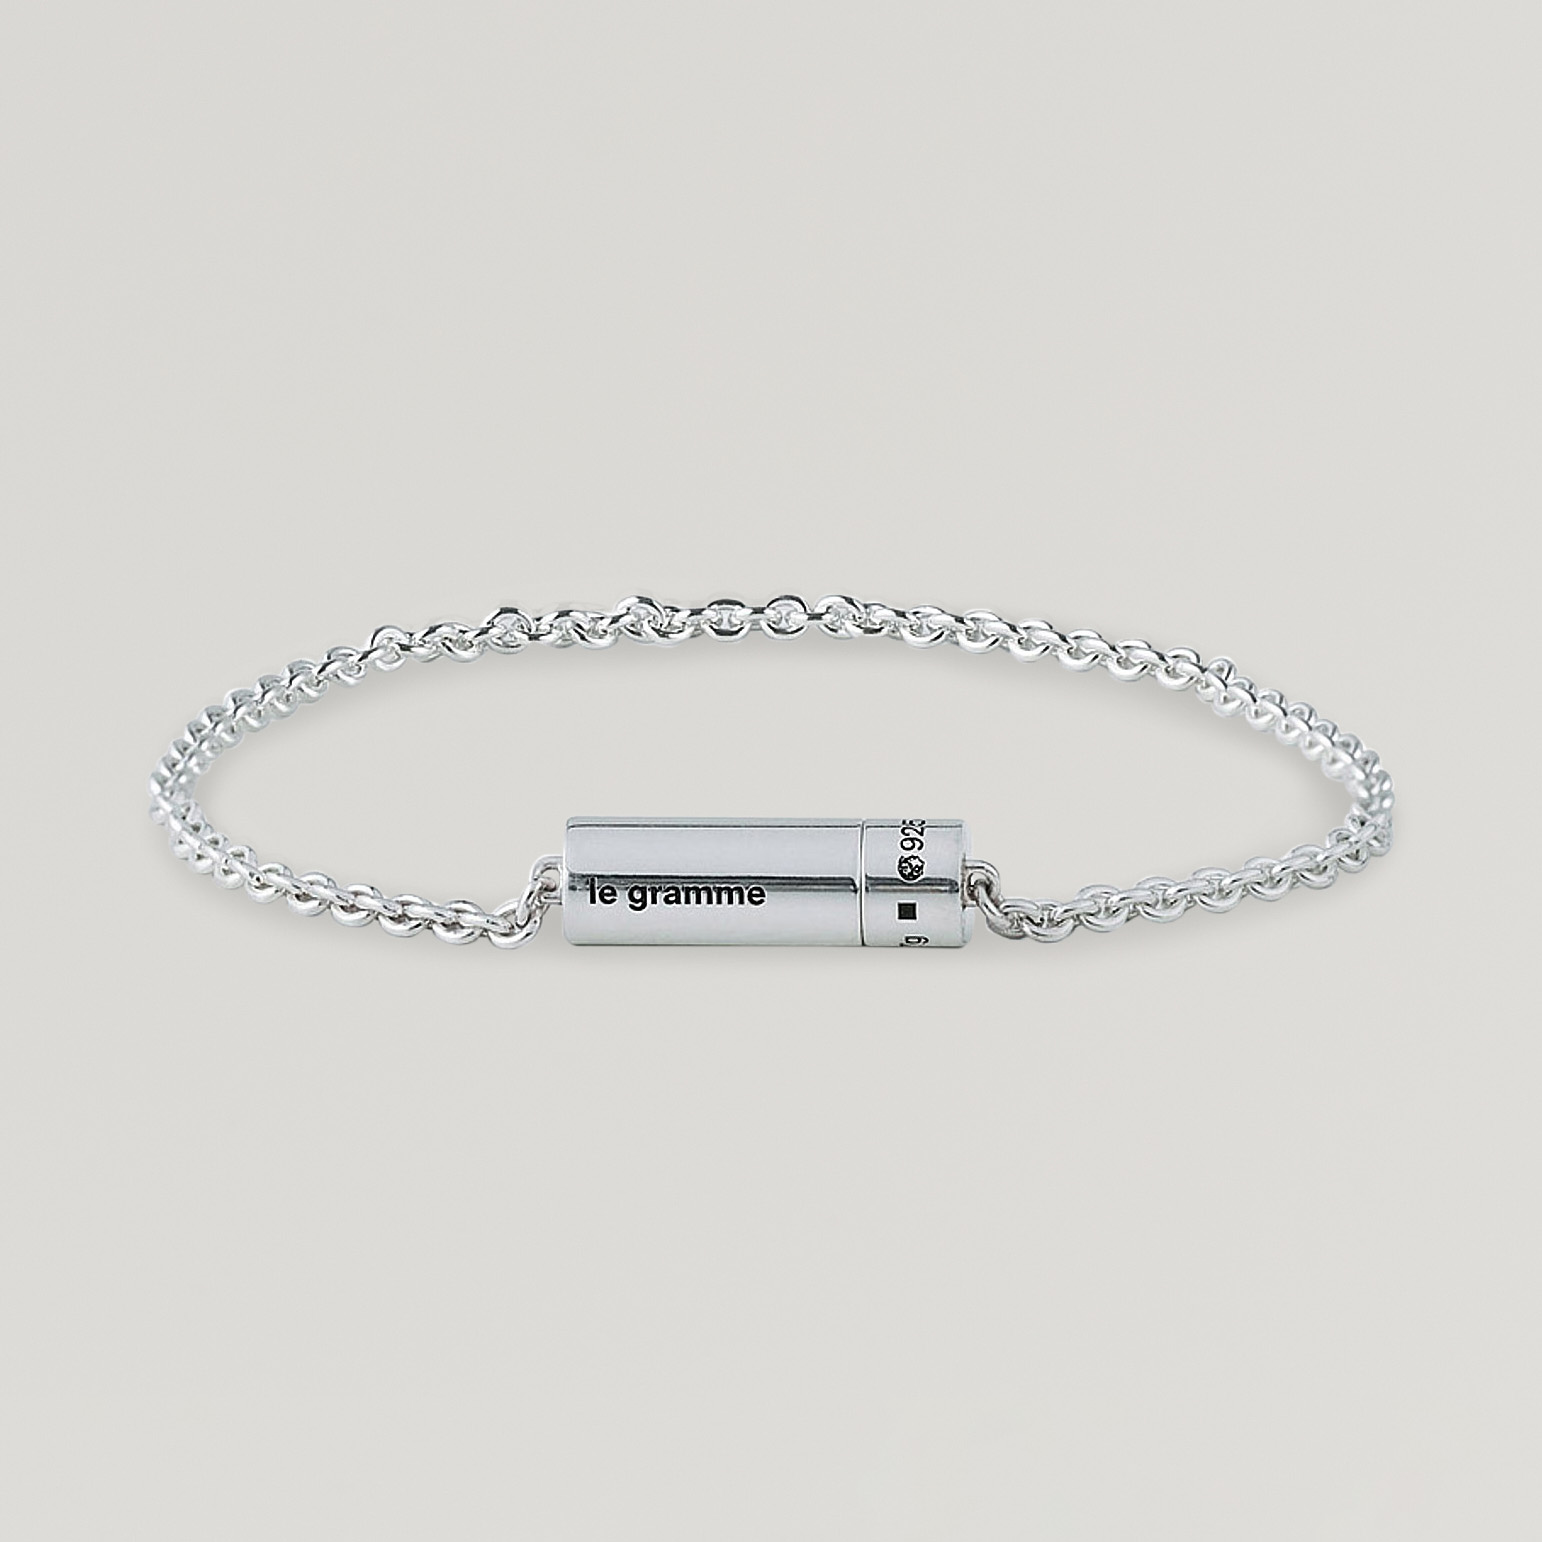 LE GRAMME Chain Cable Bracelet Sterling Silver 7g at CareOfCarl.com